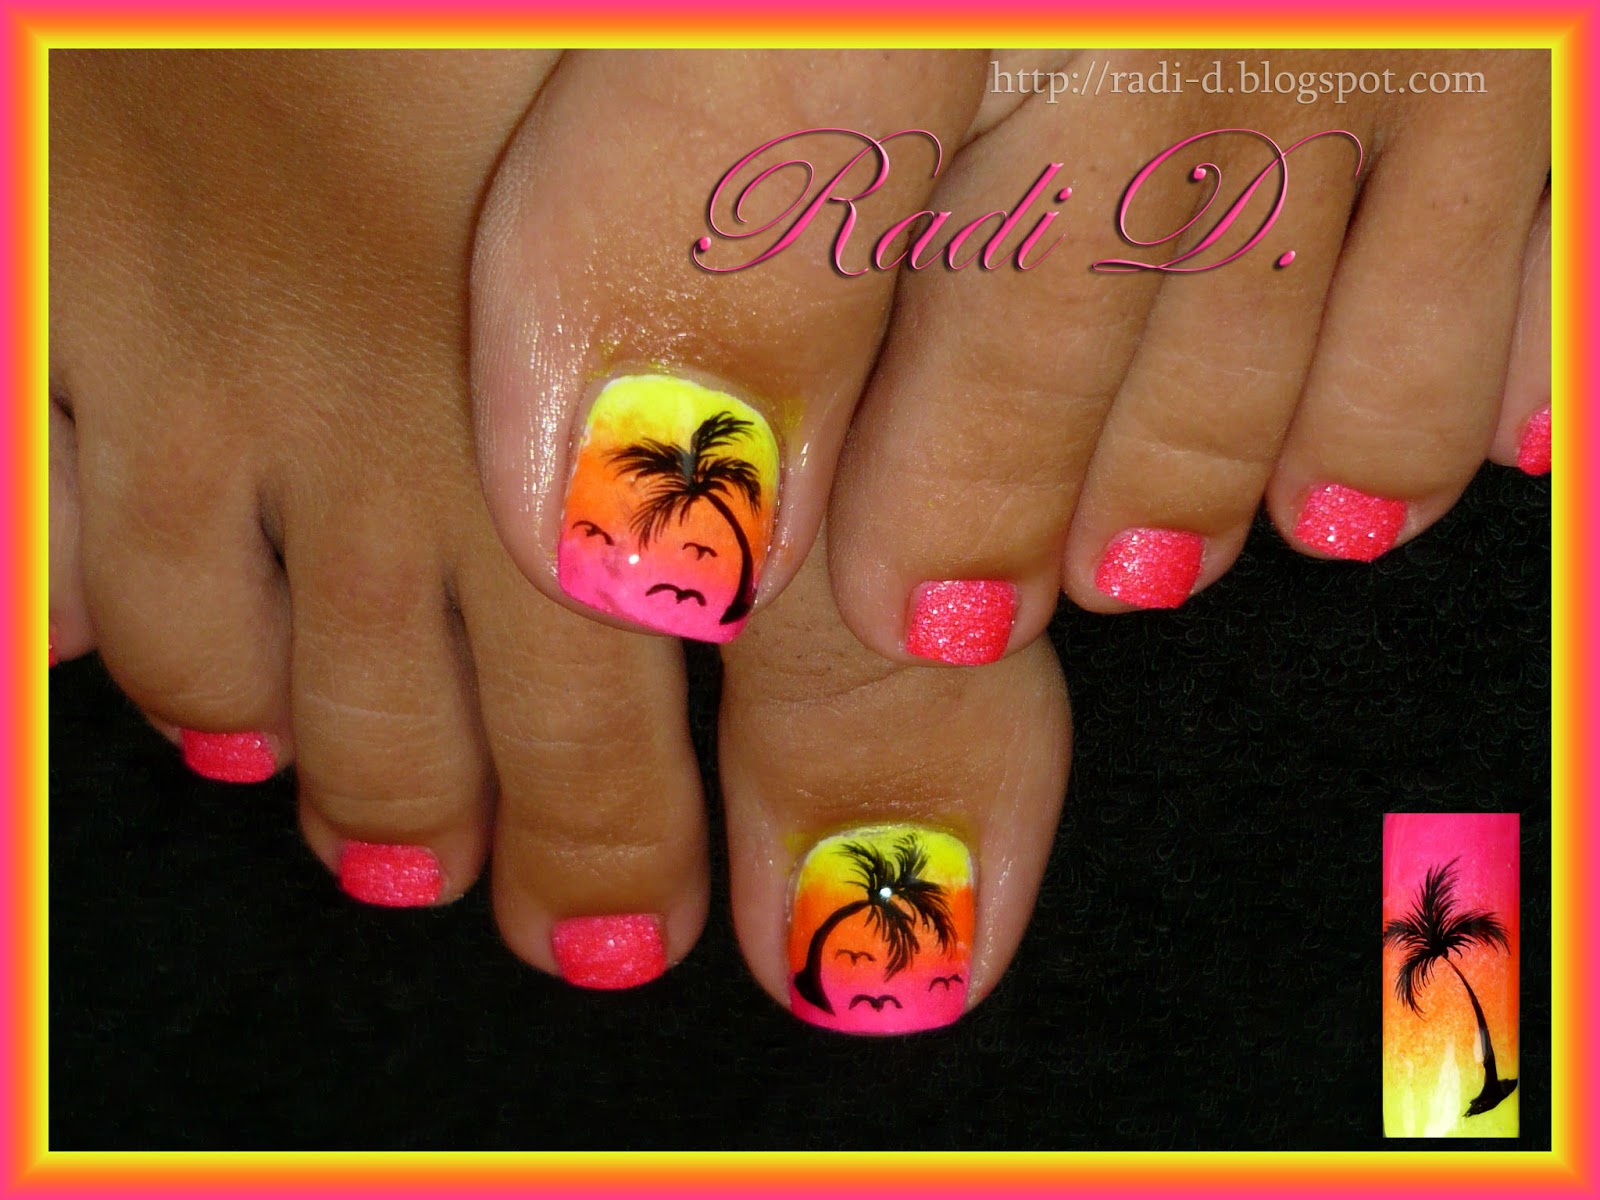 7. 15 Stunning Big Toe Nail Designs for a Beach Vacation - wide 8